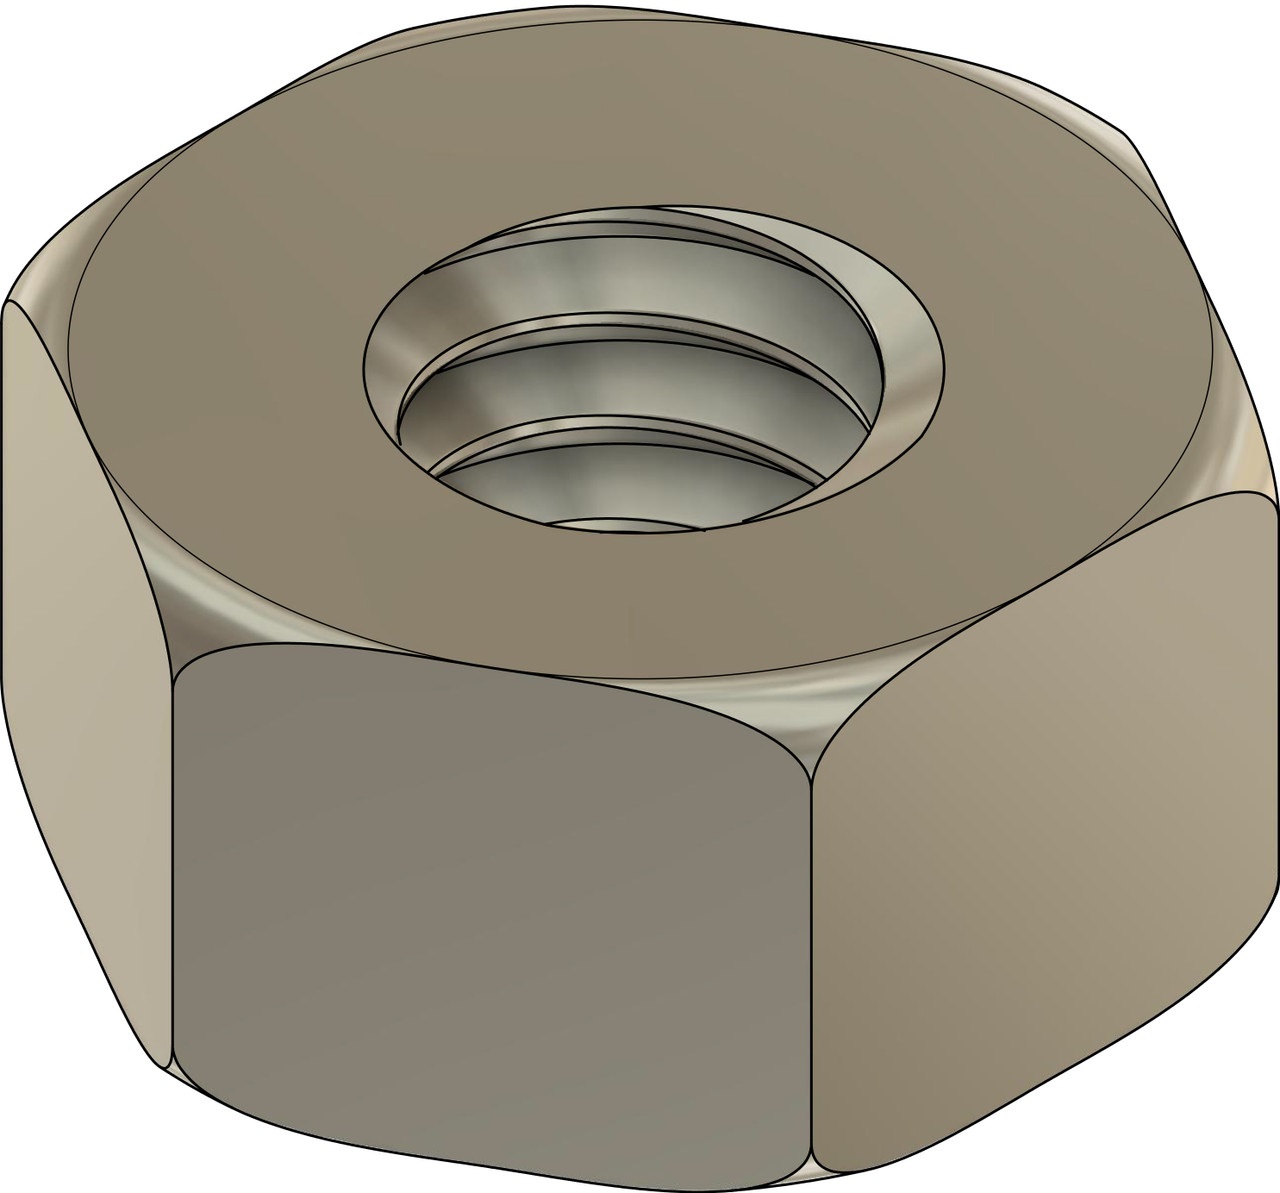 Machined Hex Nut
Standard Thread M1.2 (1.20UNM)
2.25mm / .089" ACF (Across the Flats)
Nickel Silver, Finish Color Dark Silver. Resistant to Tarnish.
Made on precision screw machines.
Price is for 100 count package